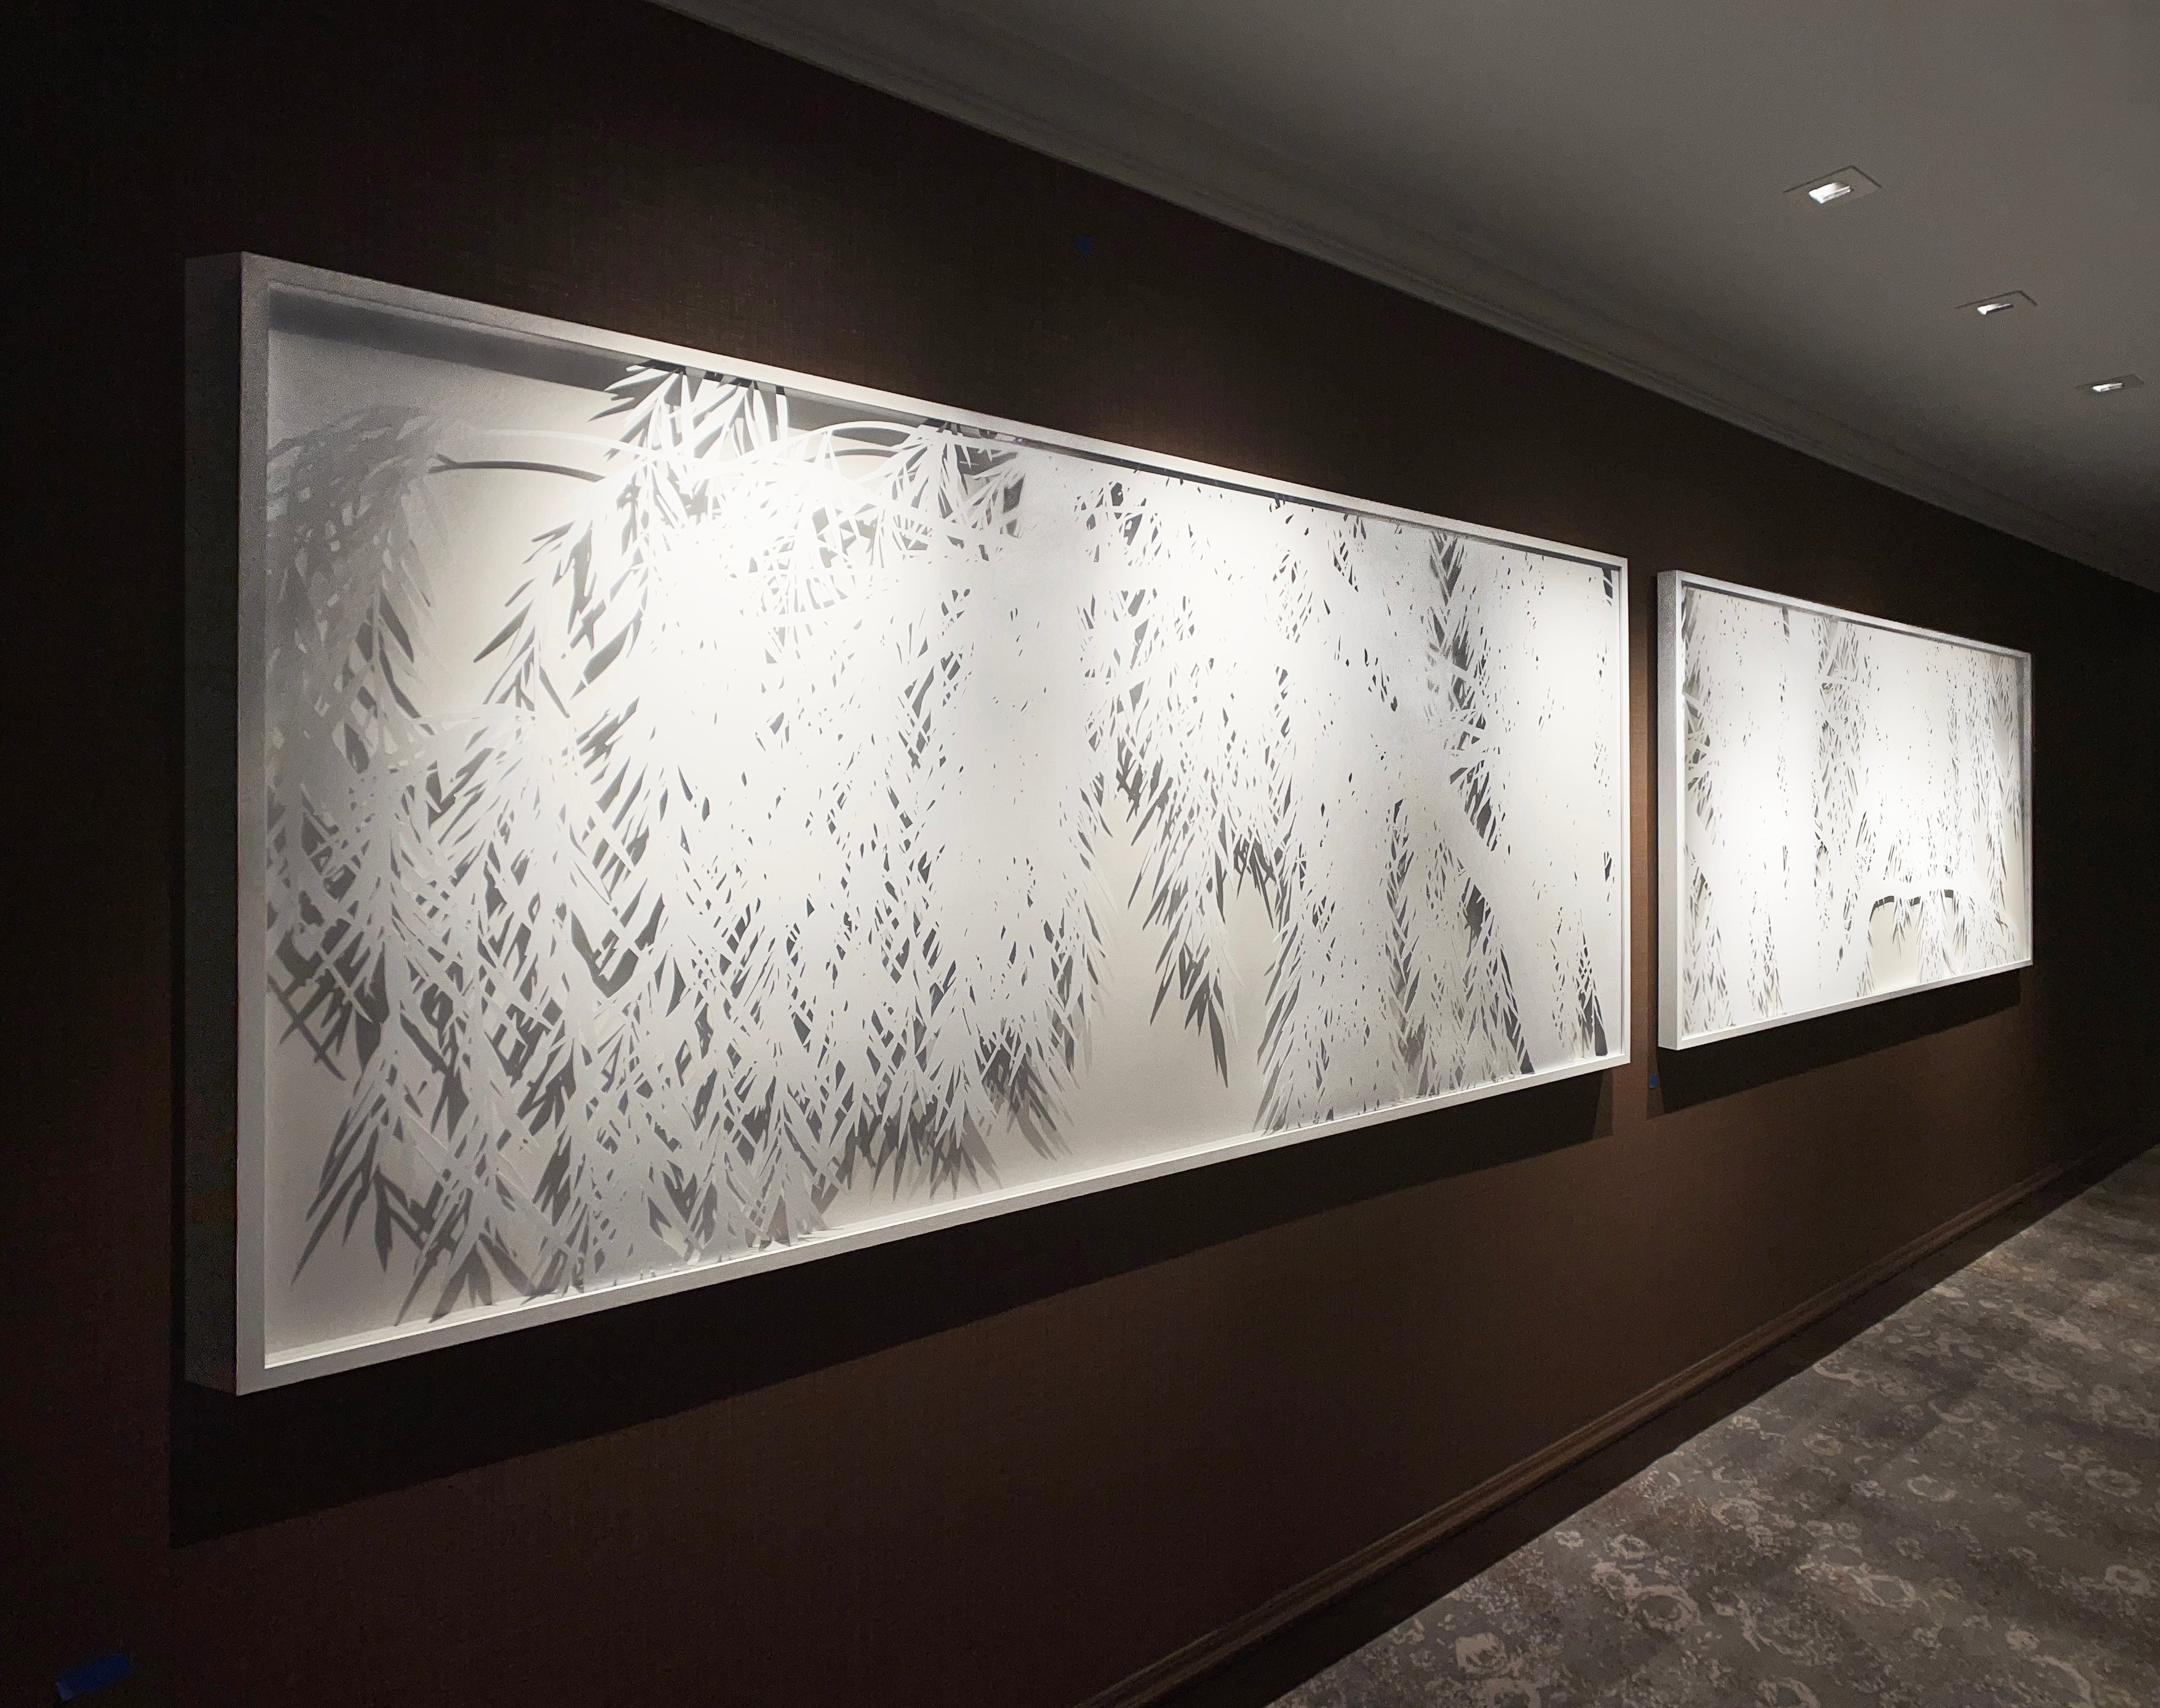 A long white relief diptych of willows by Opus Art Collective hangs in the corridor.